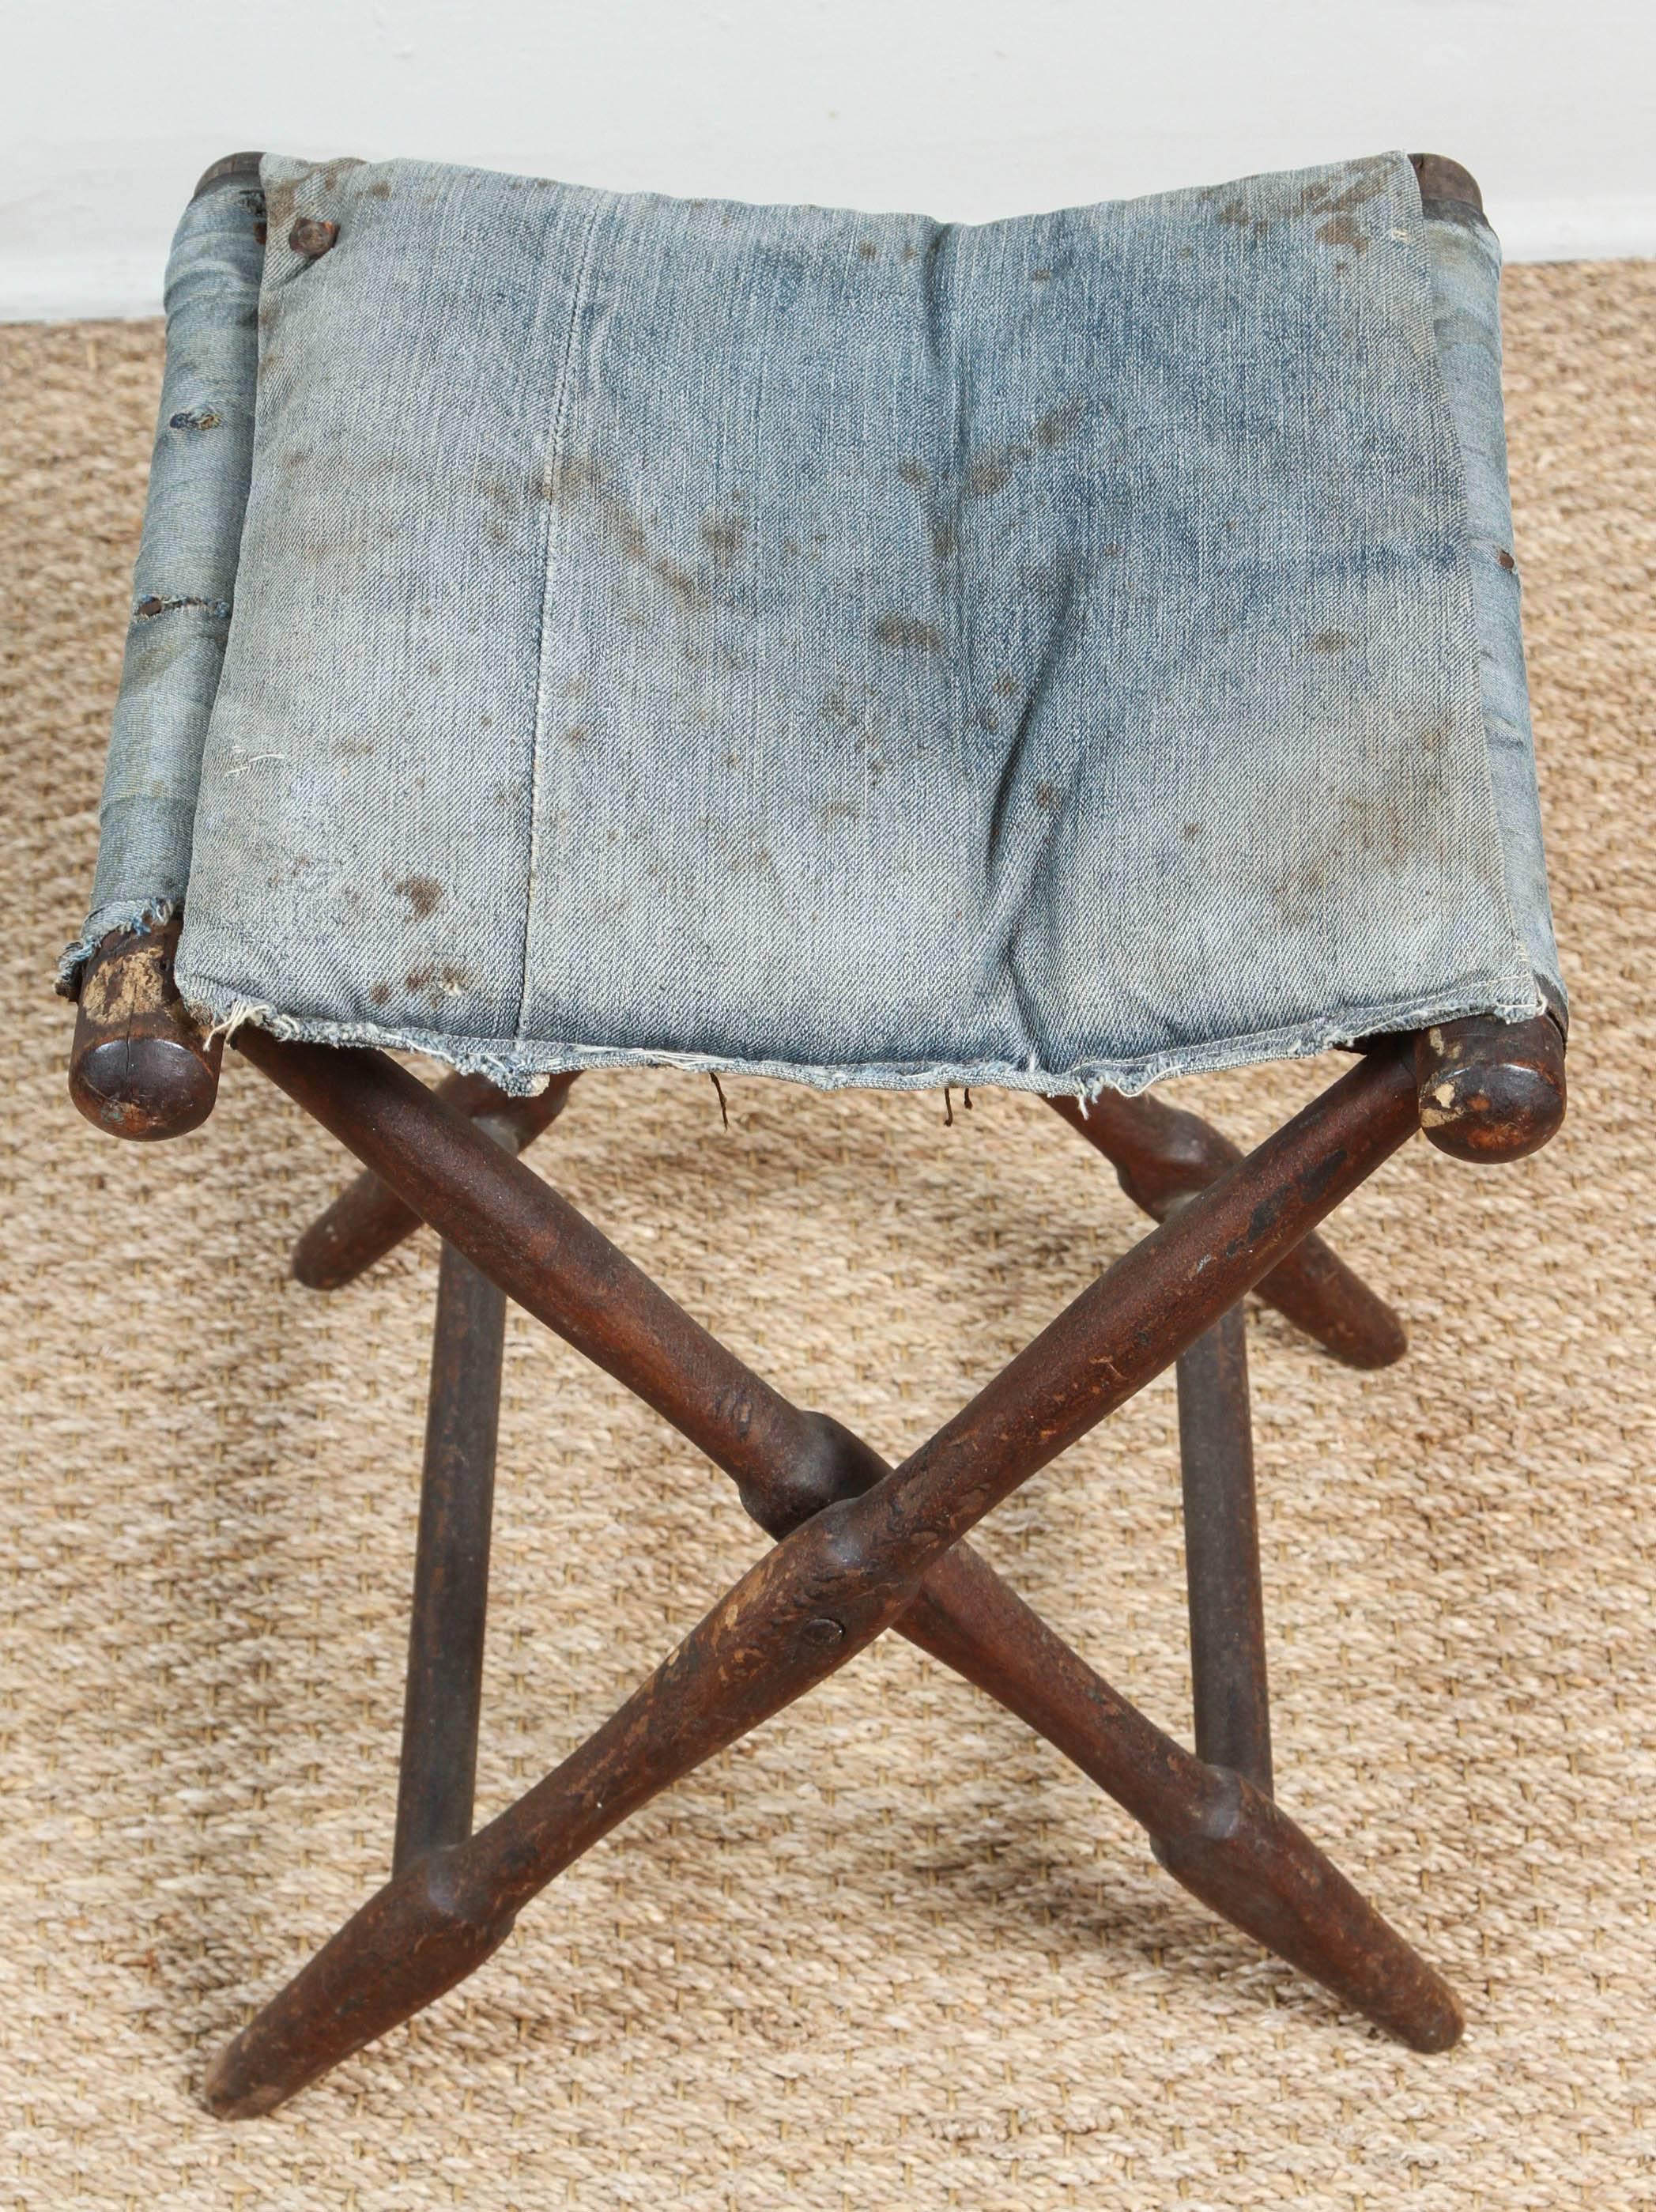 20th Century Vintage Folding Stool with Distressed and Faded Denim For Sale